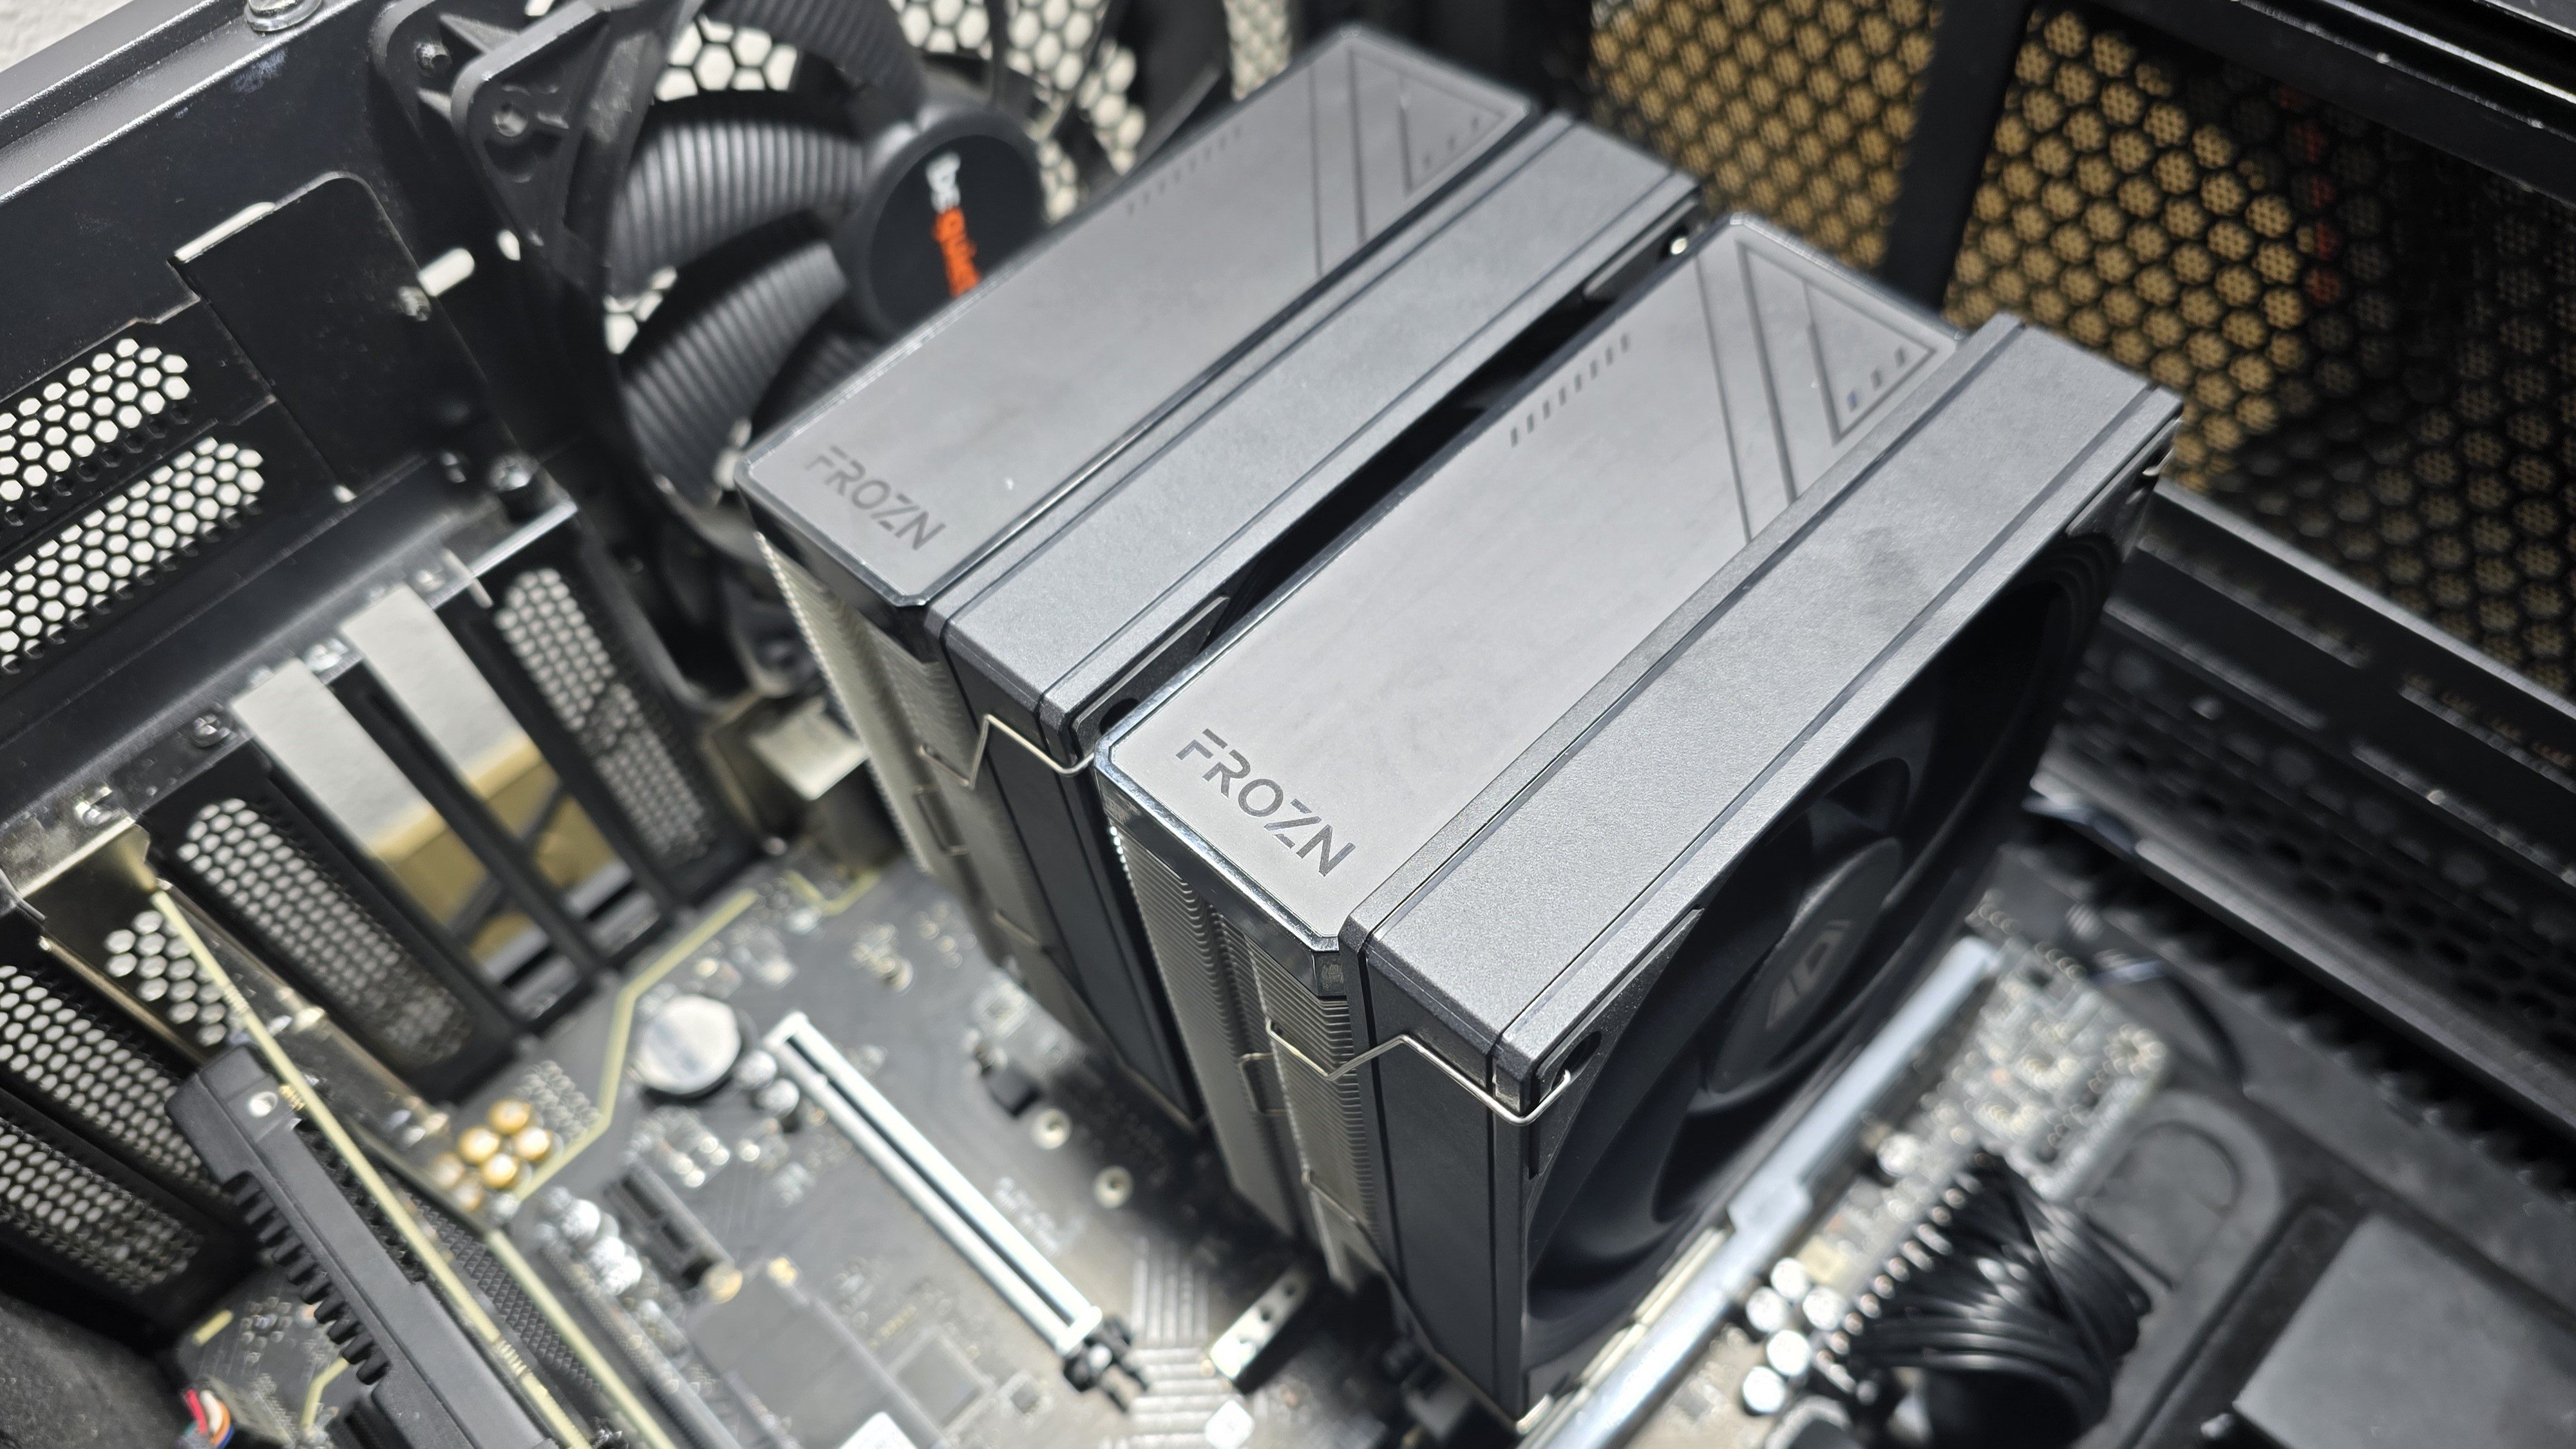 ID-Cooling Frozn A620 Pro SE